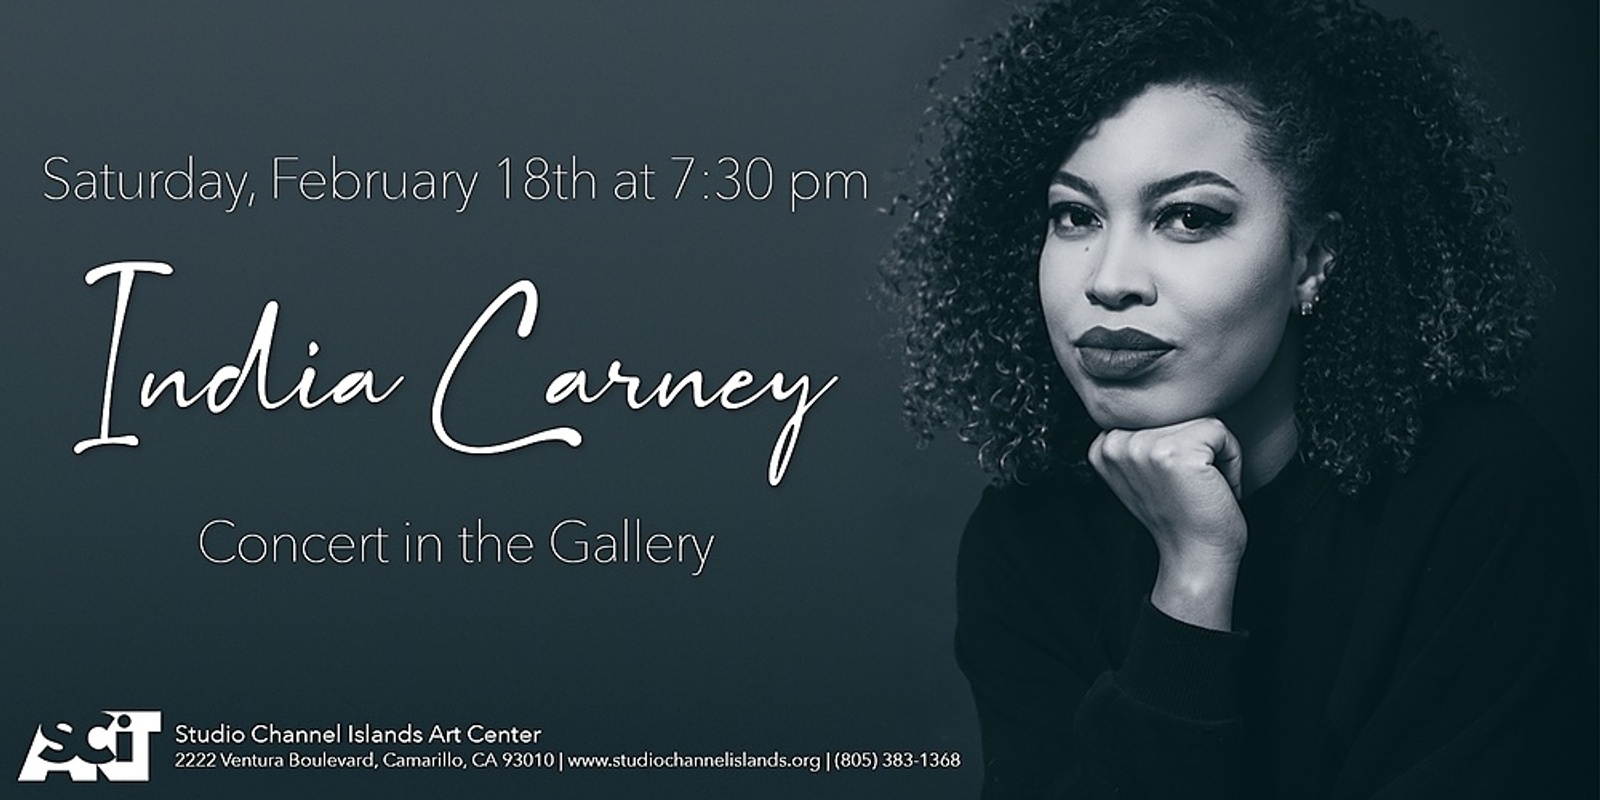 Banner image for Concert in the Gallery: India Carney